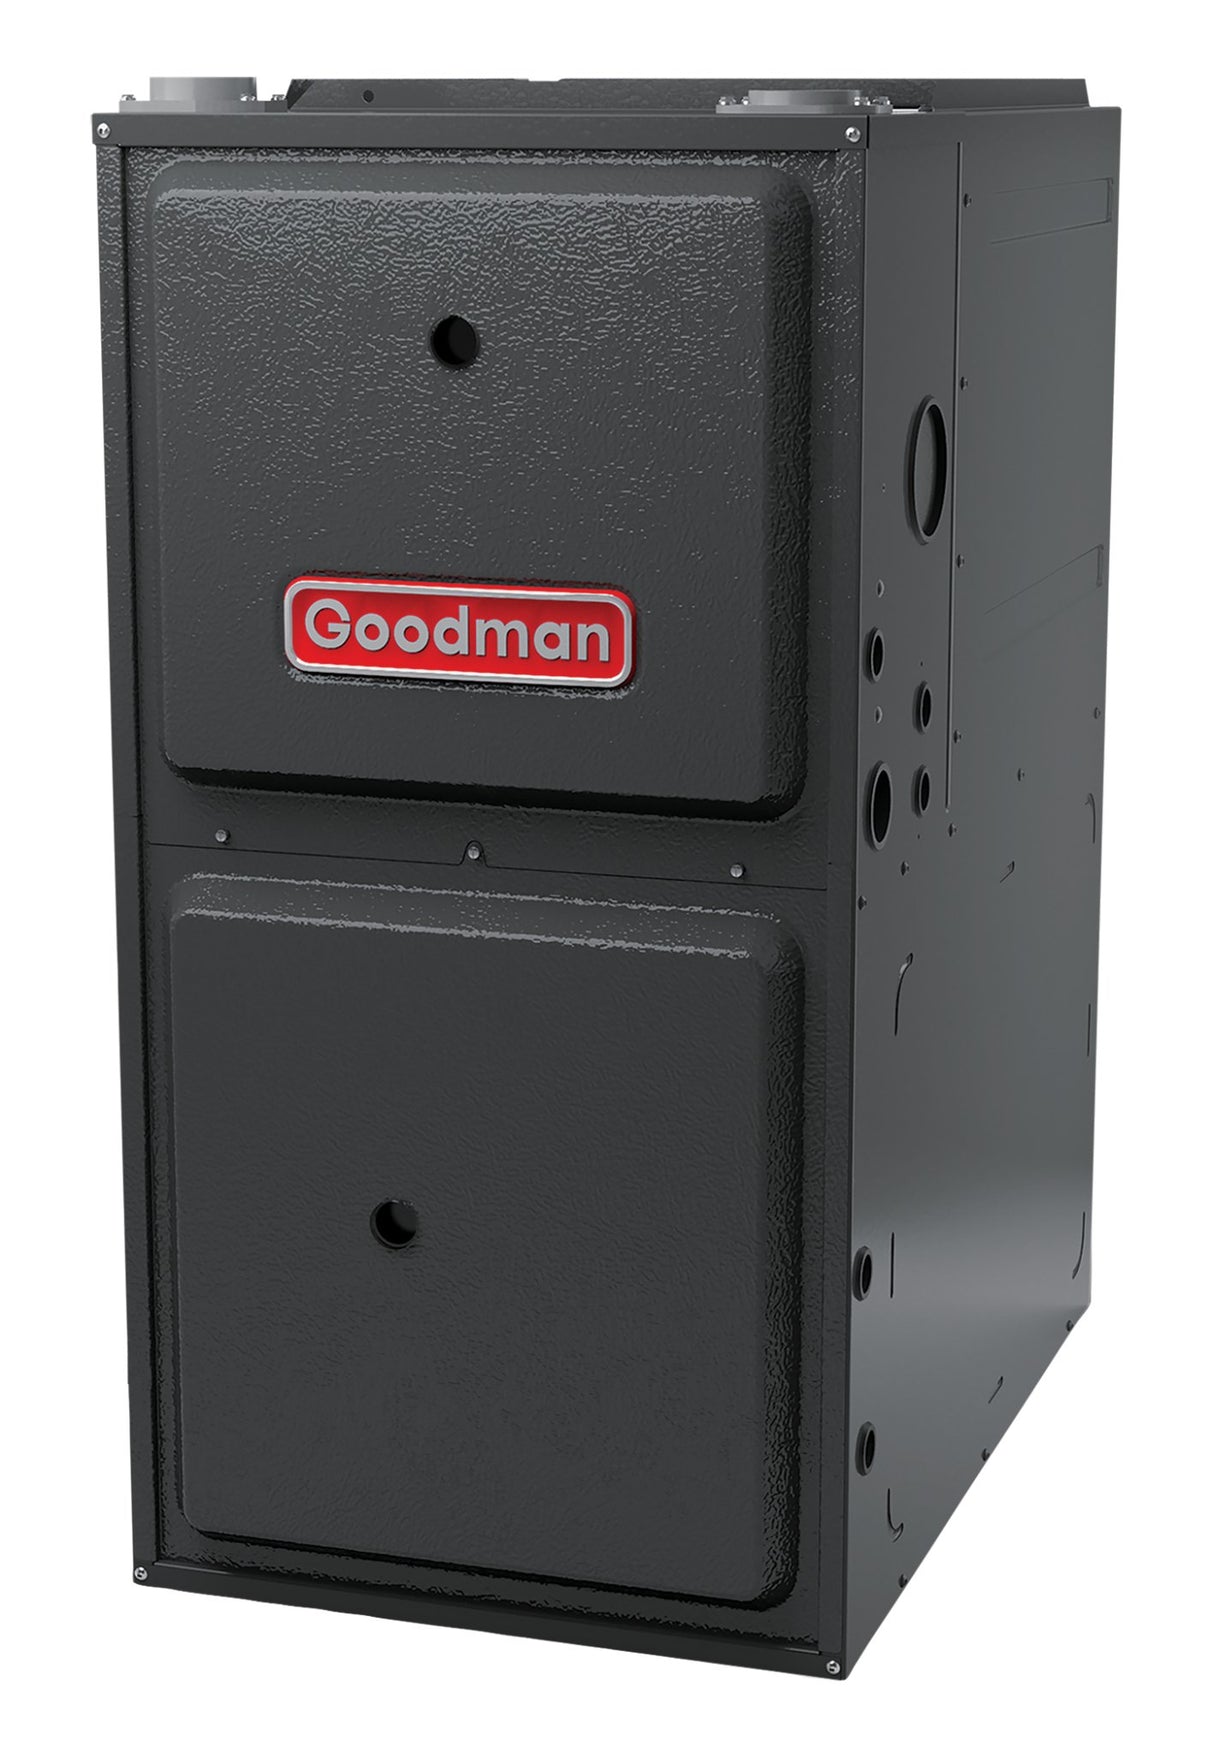 Goodman 80% gas furnace nine speed ecm two stage GM9C800803BN - AC units for less